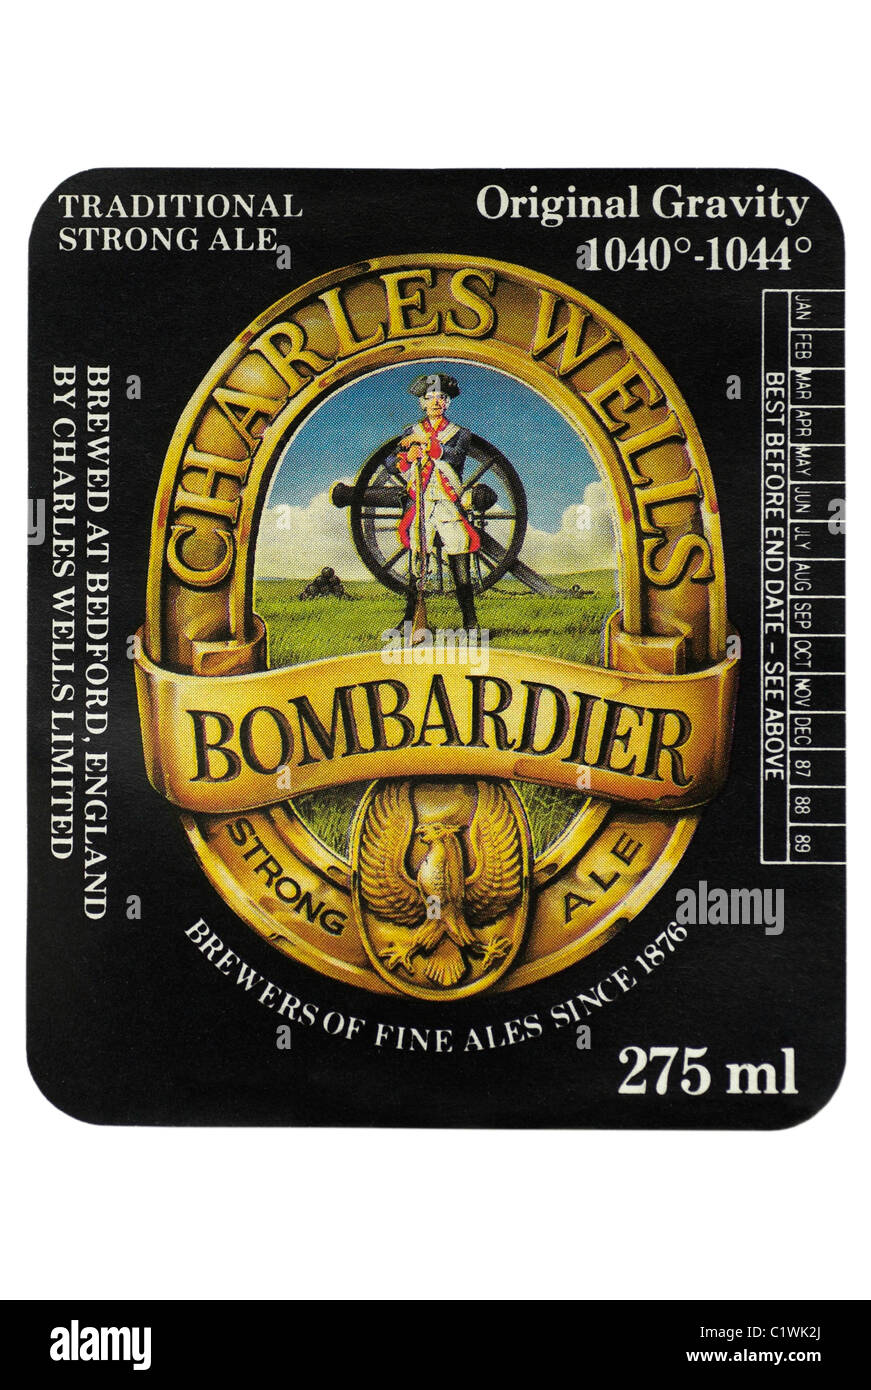 Charles Wells Bombardier Strong Ale bottle label circa 1987-1989. Stock Photo